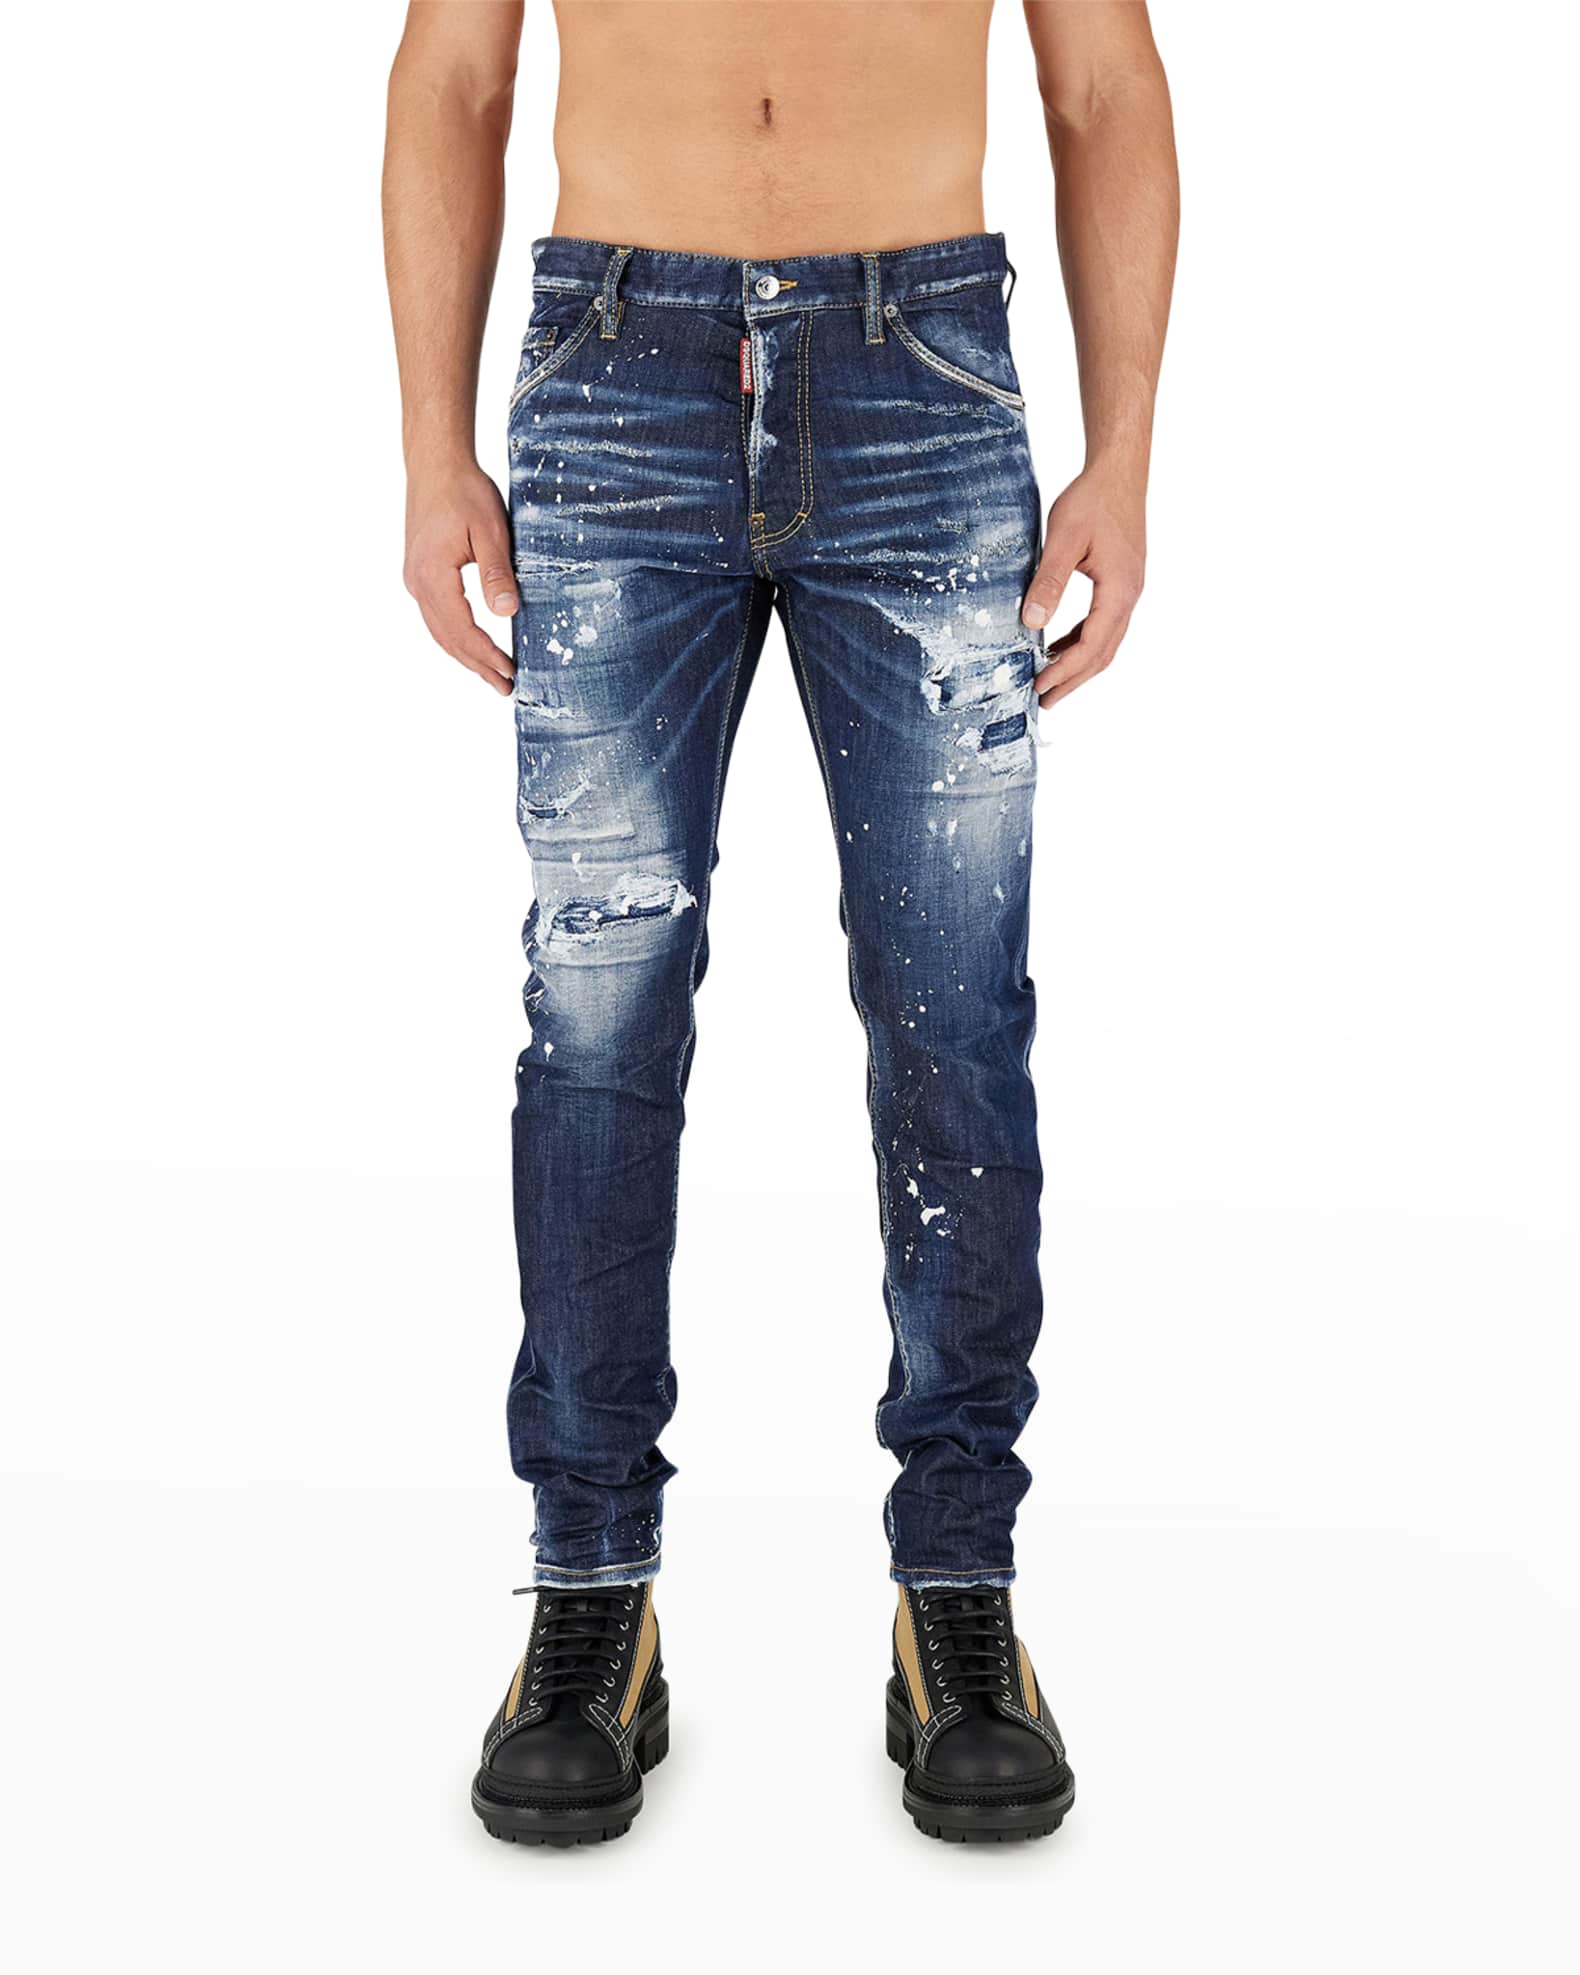 Men's Cool Guy Distressed Paint Jeans